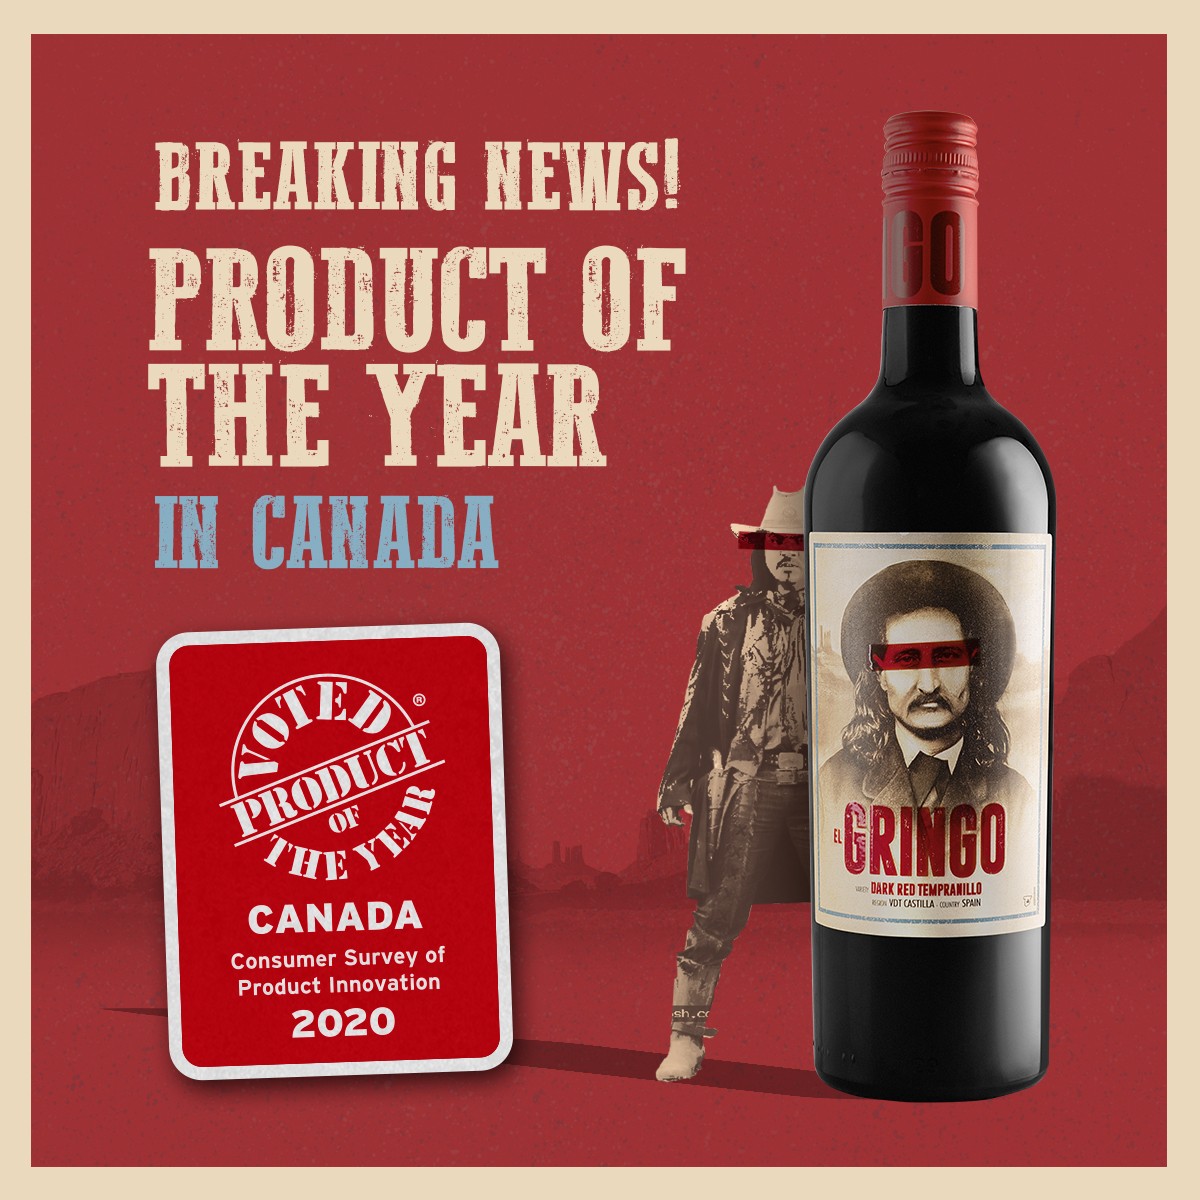 El Gringo Red Tempranillo, Product of the Year in Canada